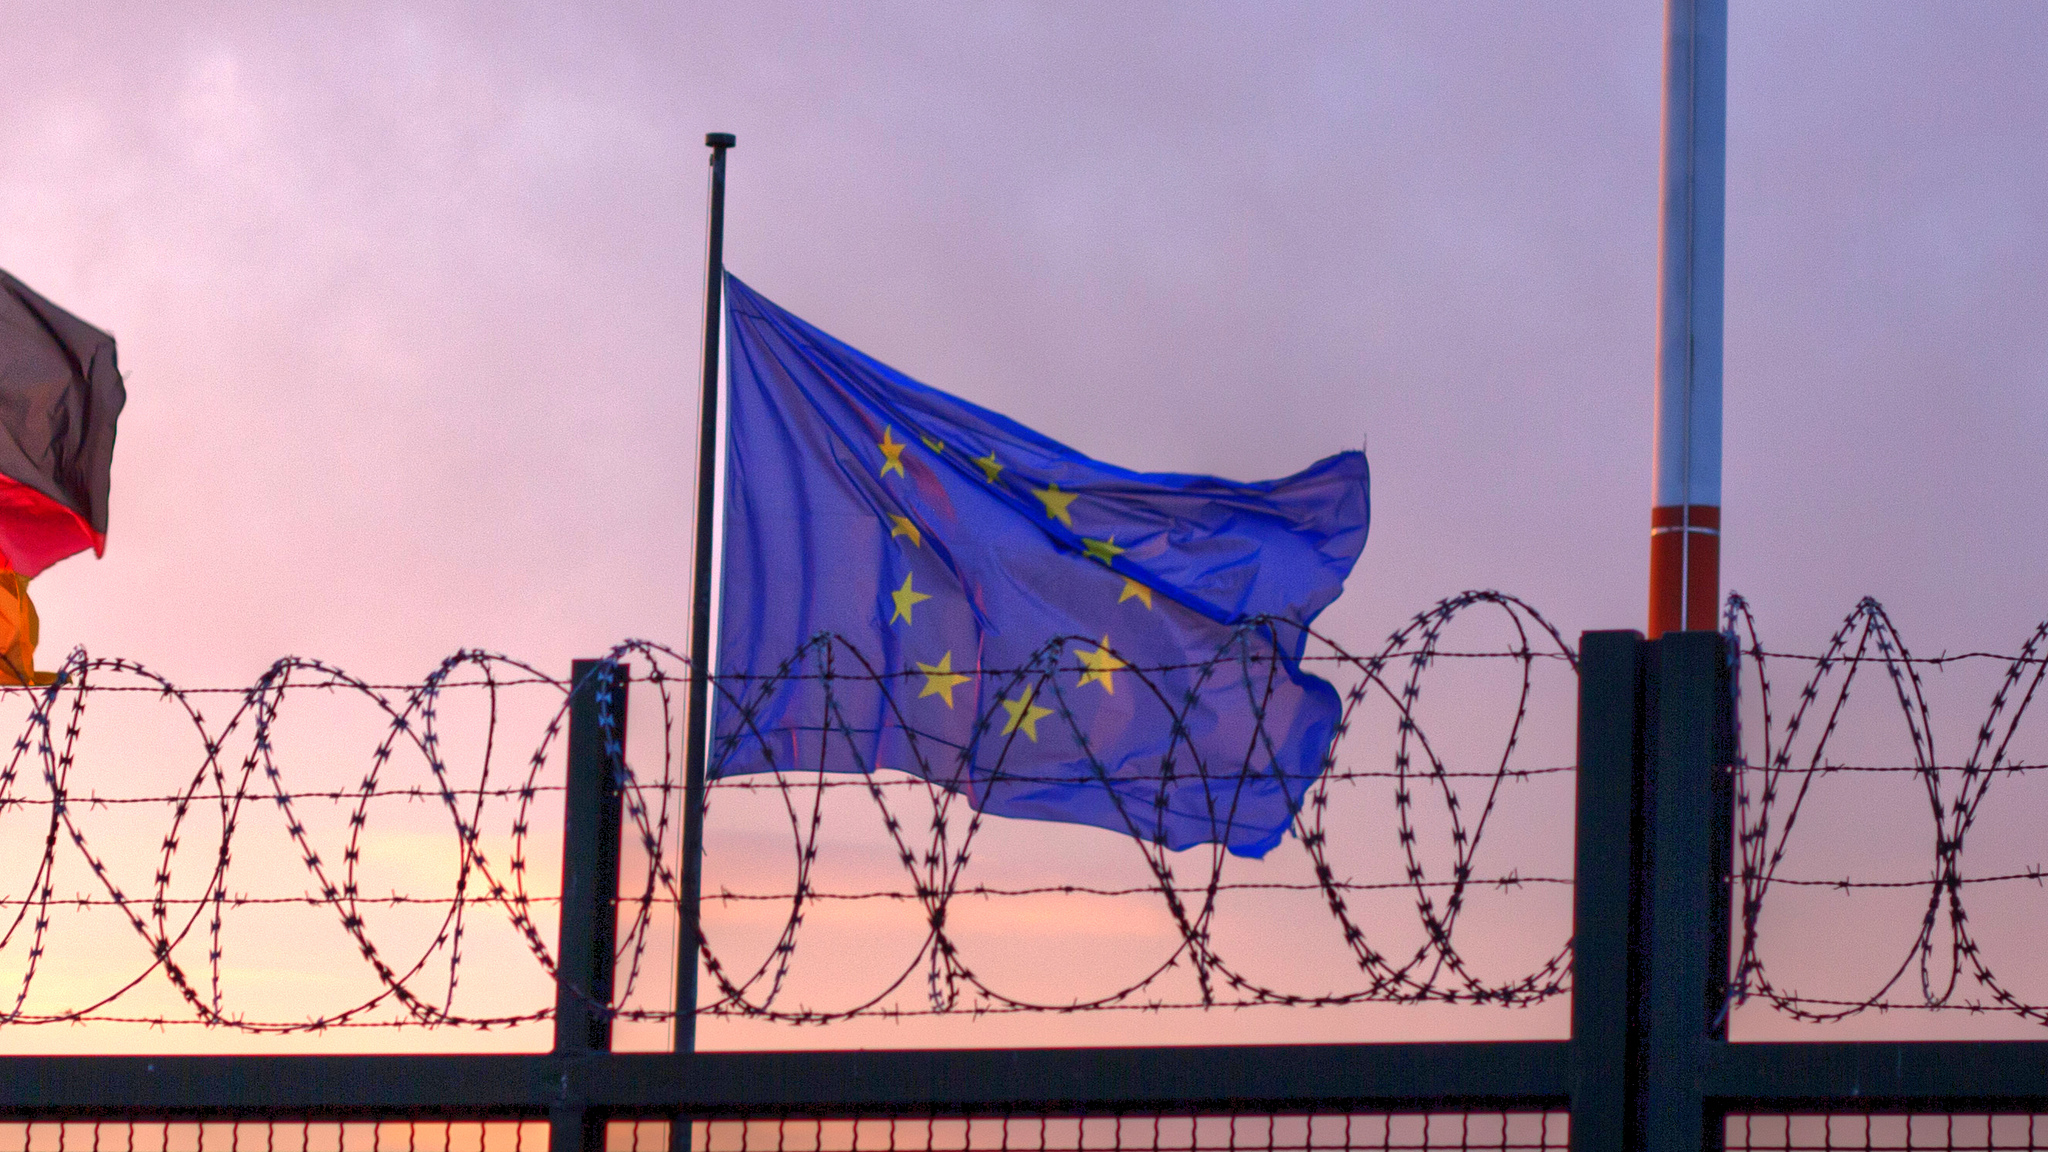 The flag of the European Union flying in from of barbed wire